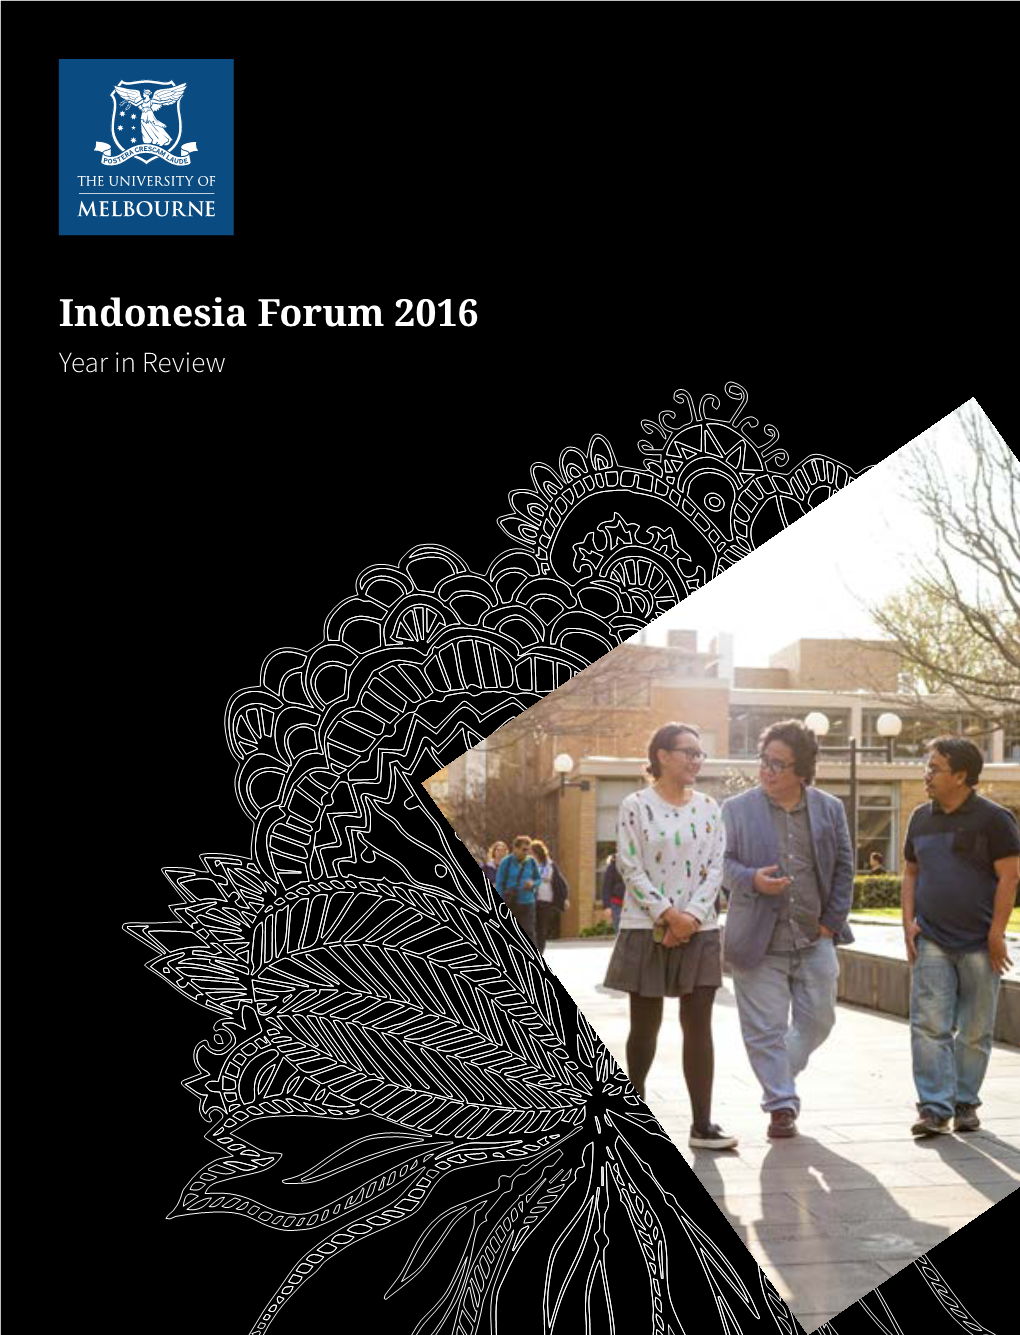 Indonesia Forum 2016 Year in Review Contents